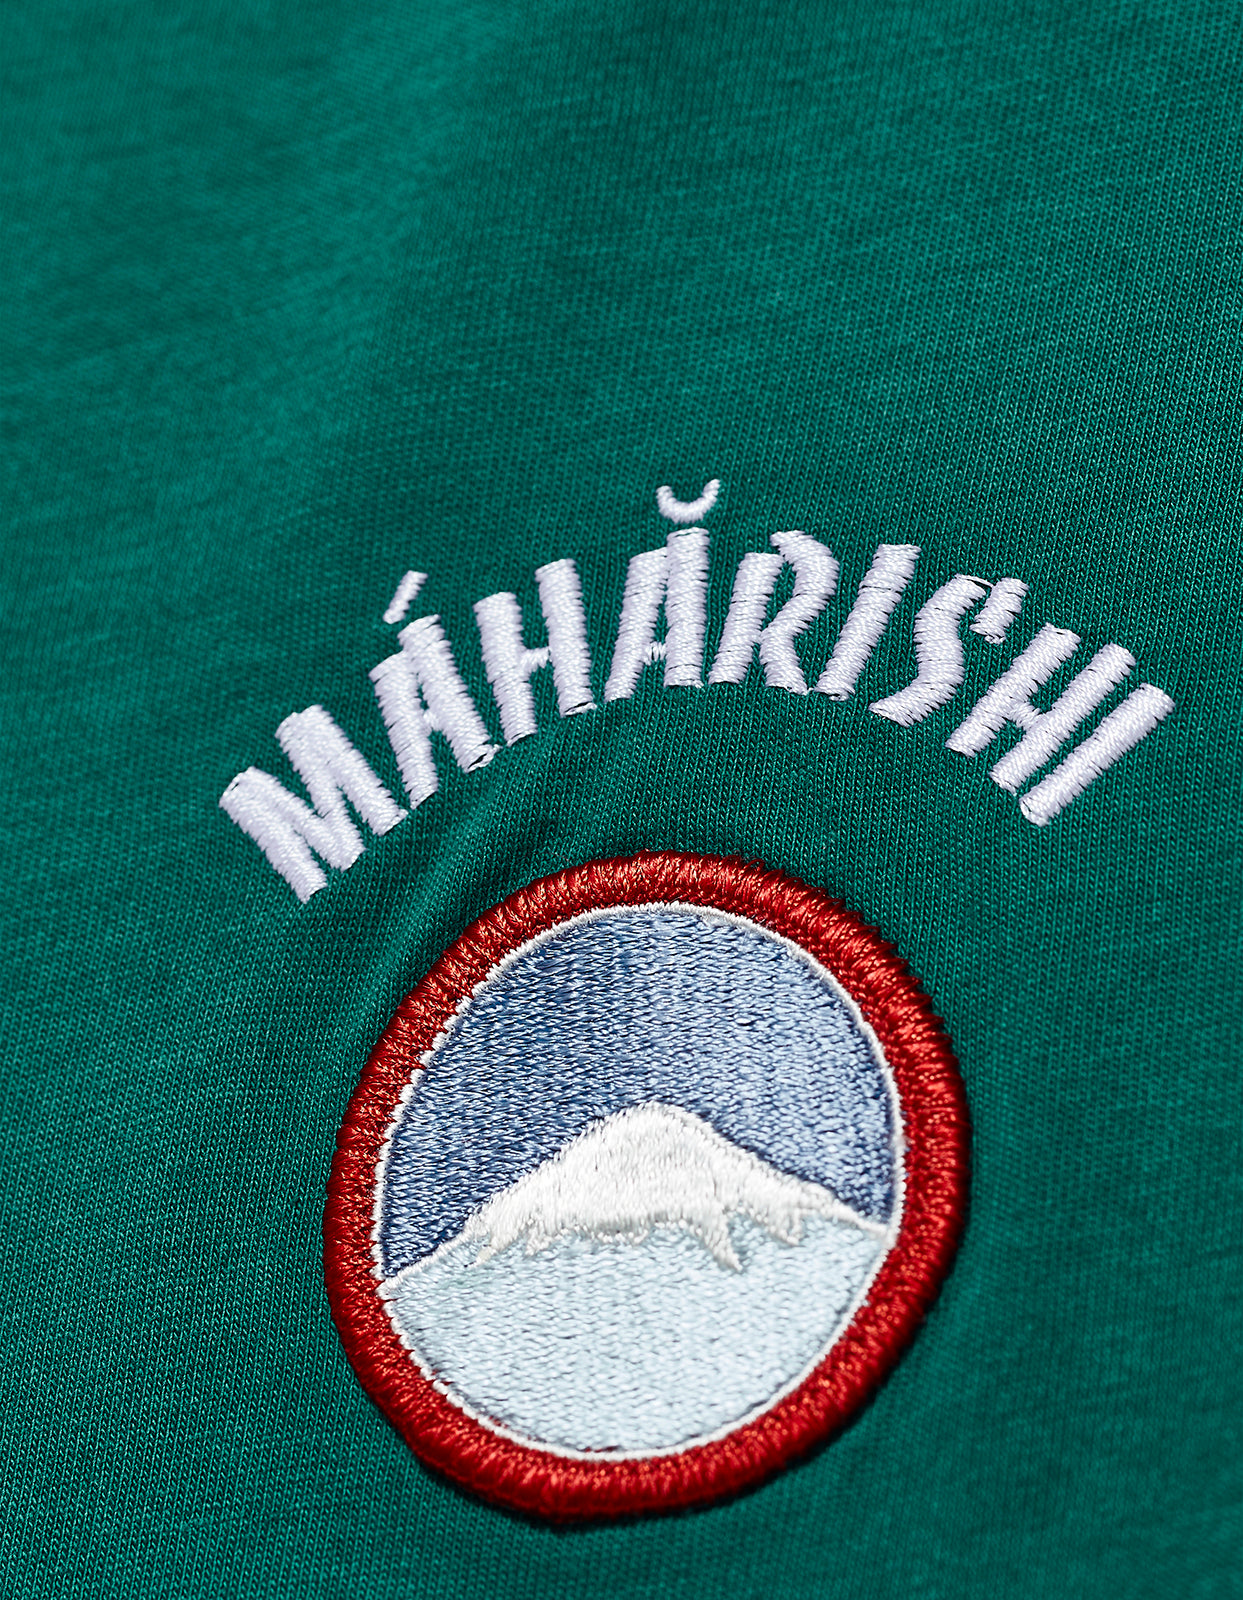 9858 Mahapatchco. Embroidered L/S T-Shirt Dark Teal